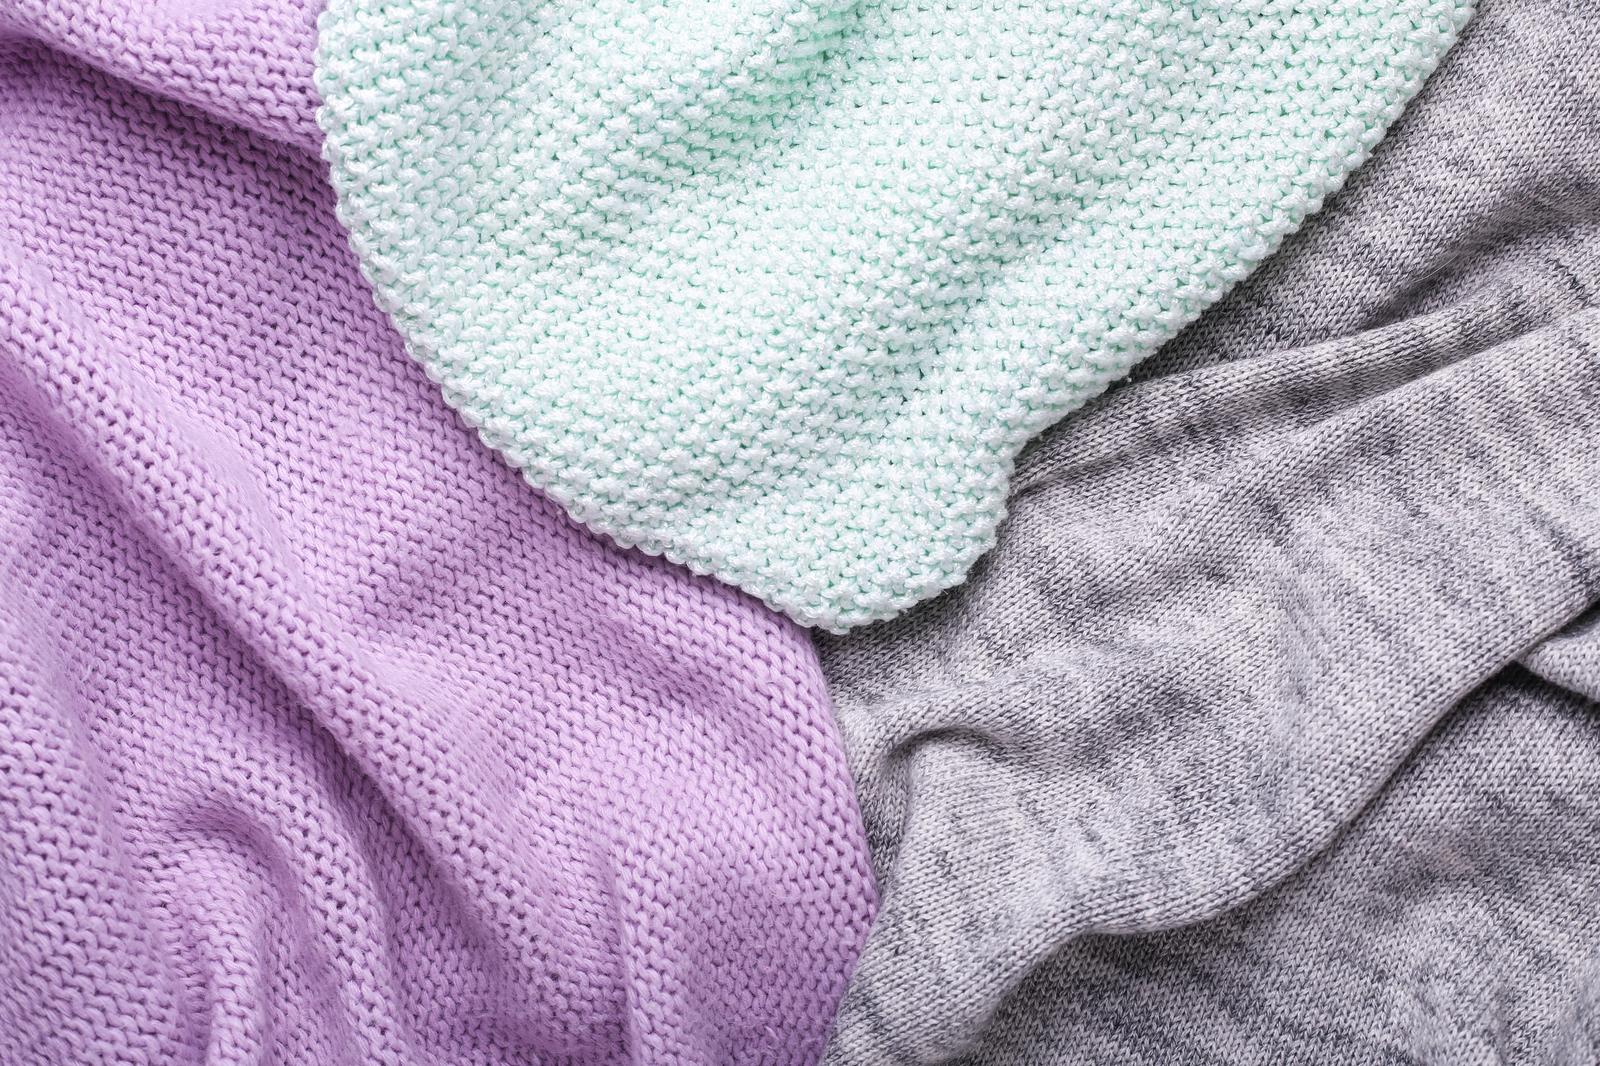 EVI PALM FIE - manufacture of knitted and crocheted pullovers, cardigans, etc. in Pärnu county